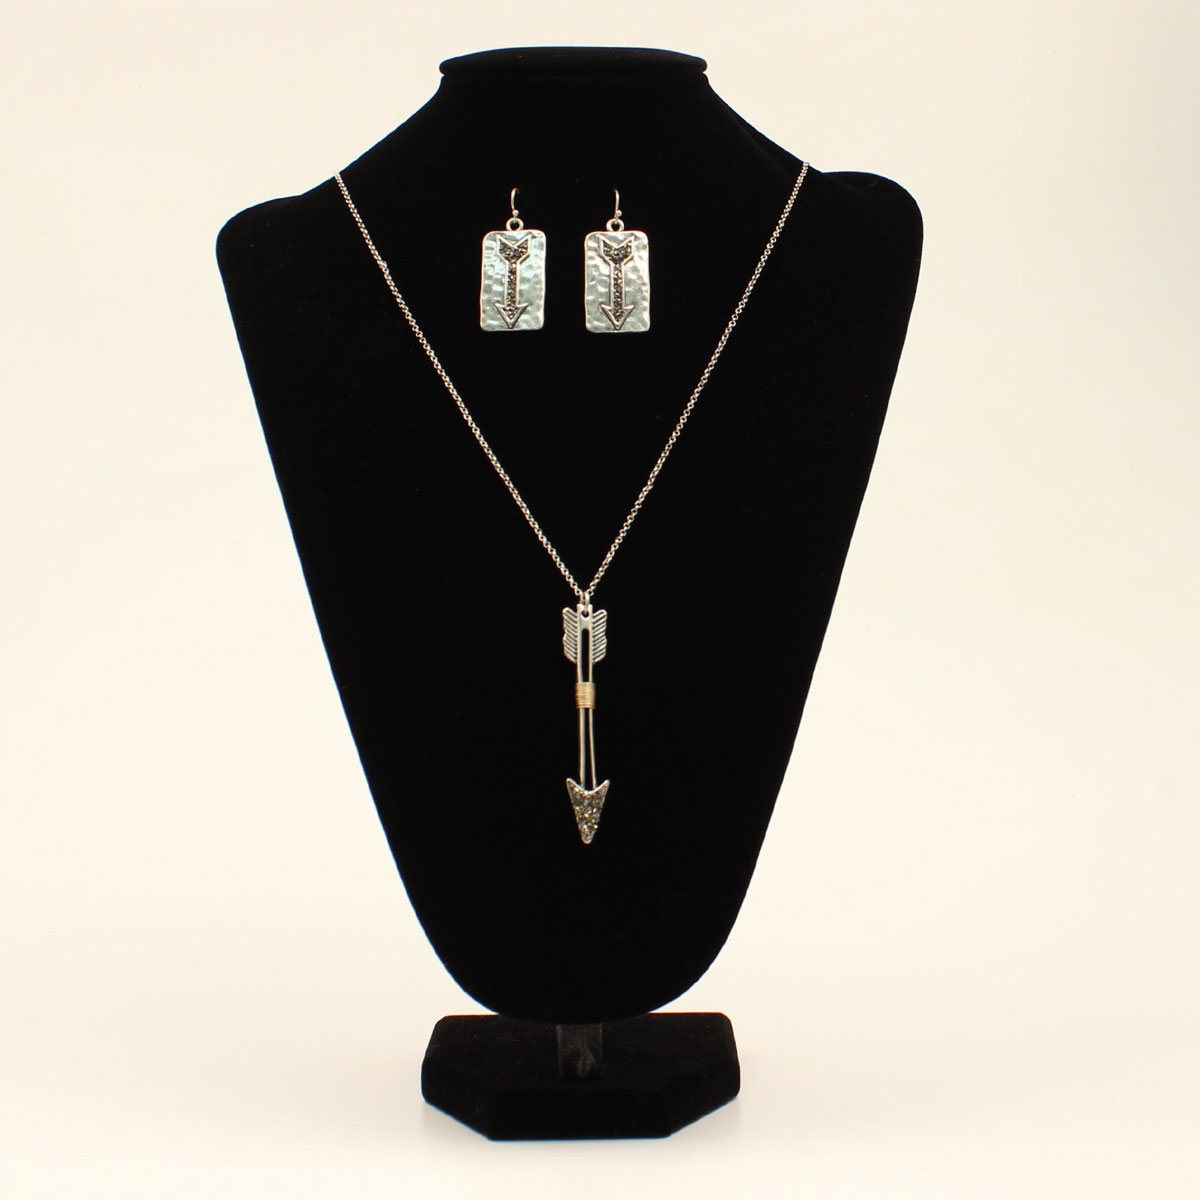 30960 Small Silver Chain Arrow Pendant Necklace & Earrings Set - 35 In.